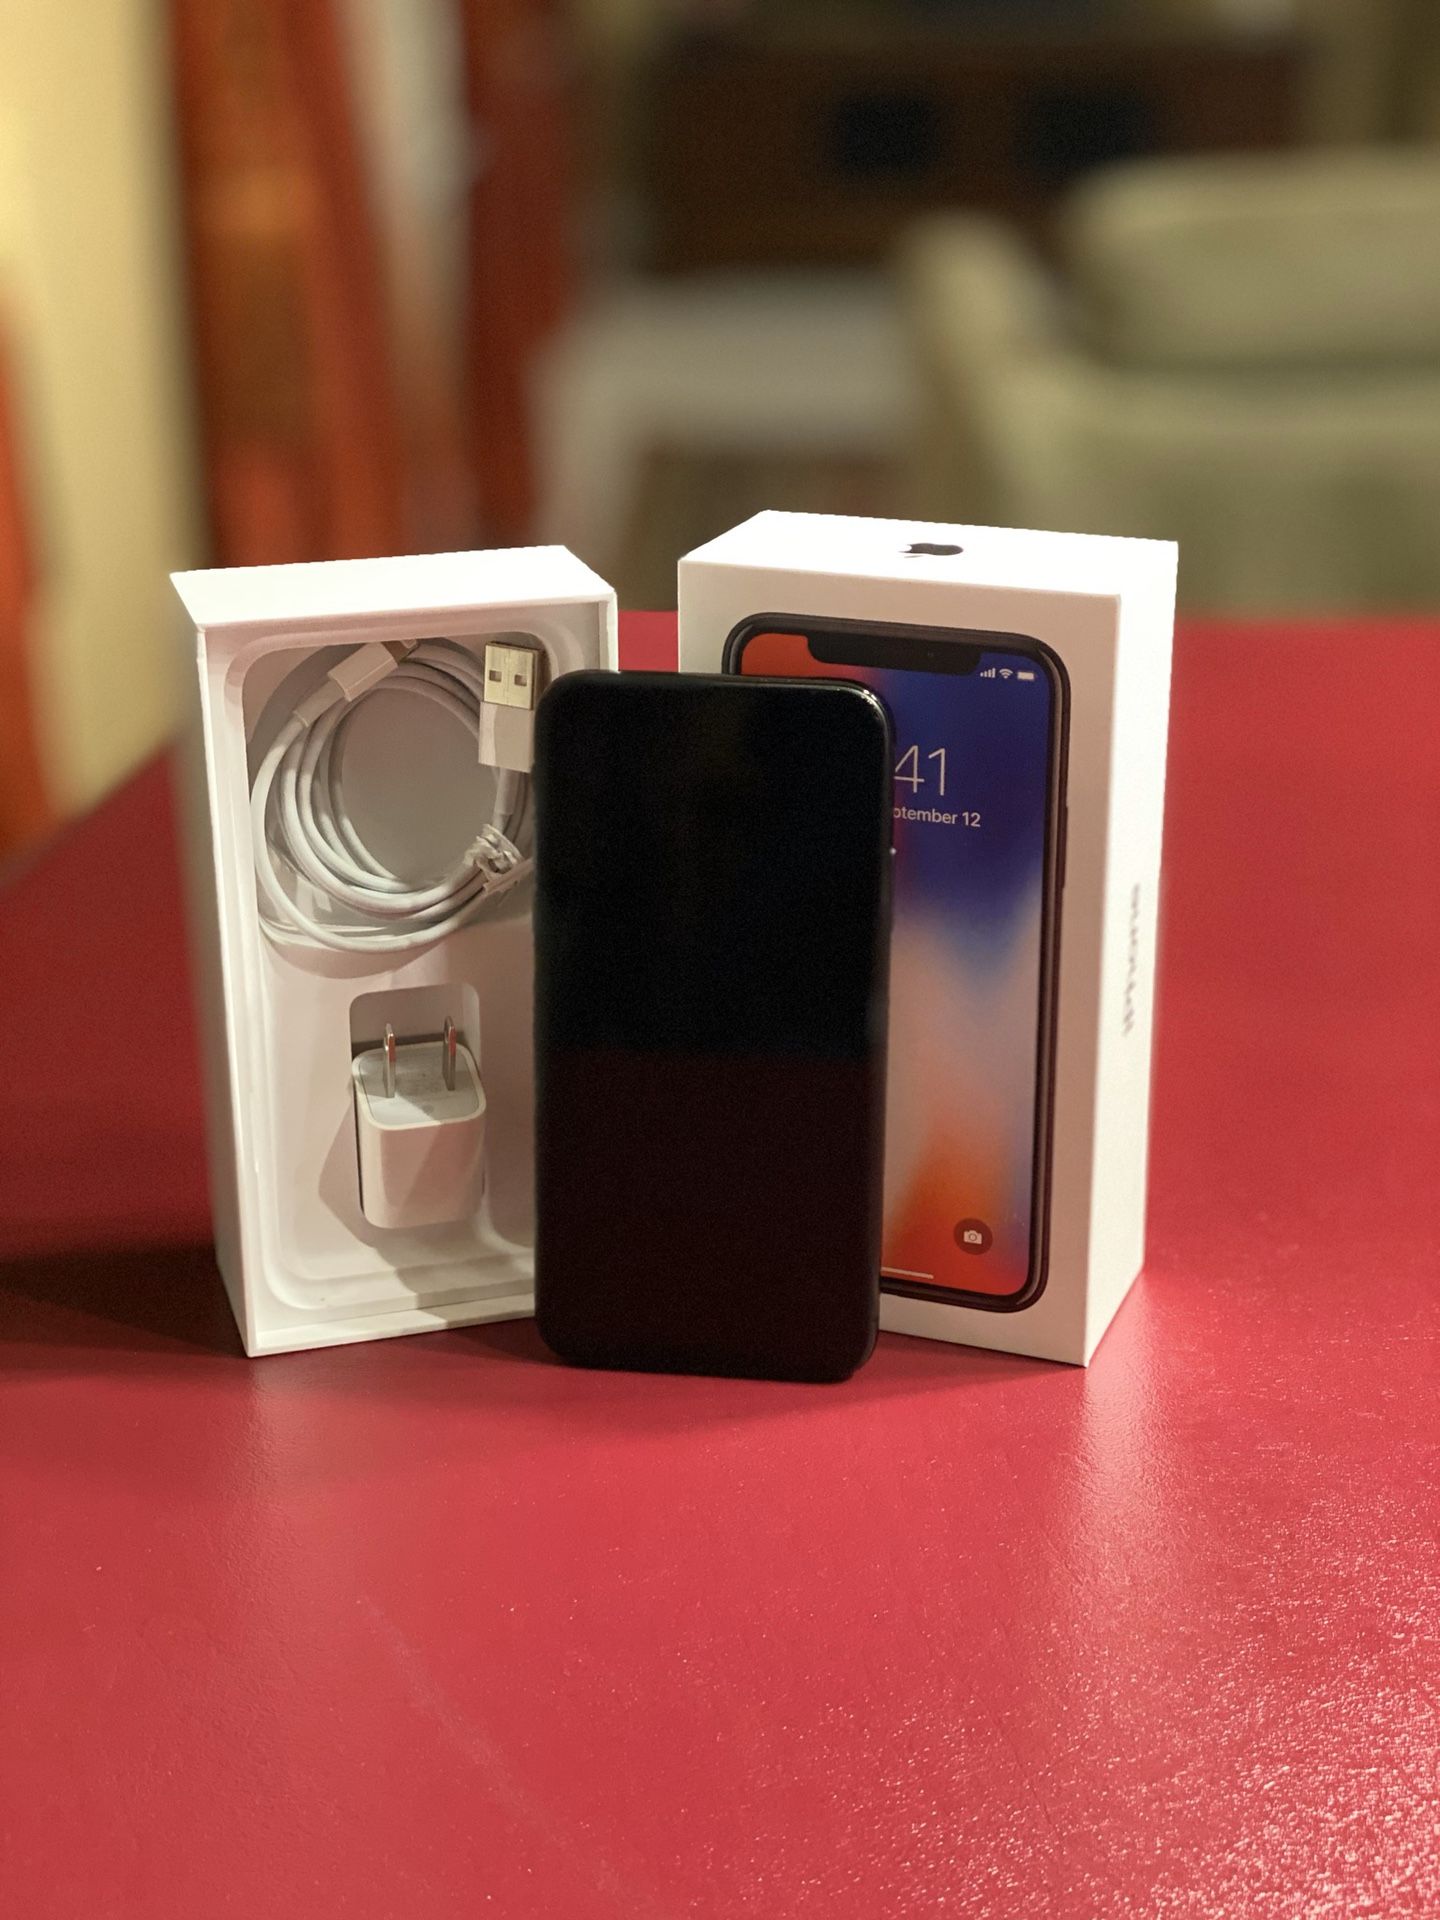 Iphone X 64Gb unlocked excellent like new condition $450